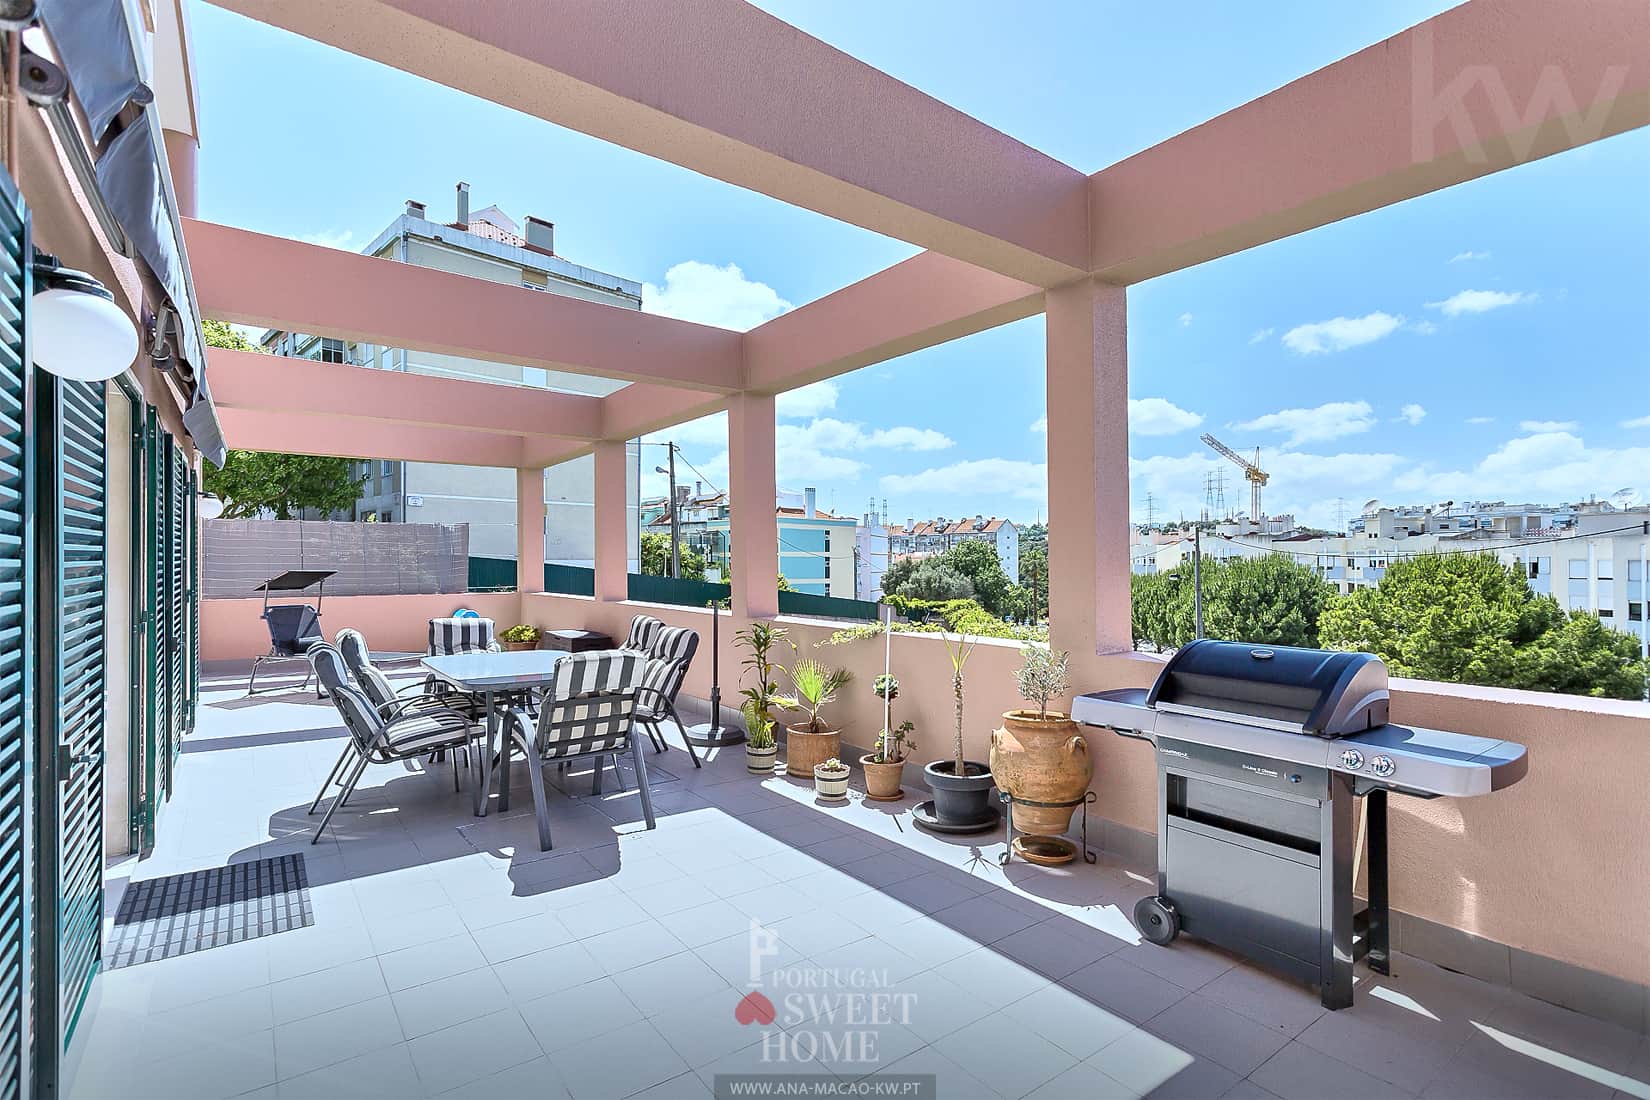 Large terrace (70 m2) with open views